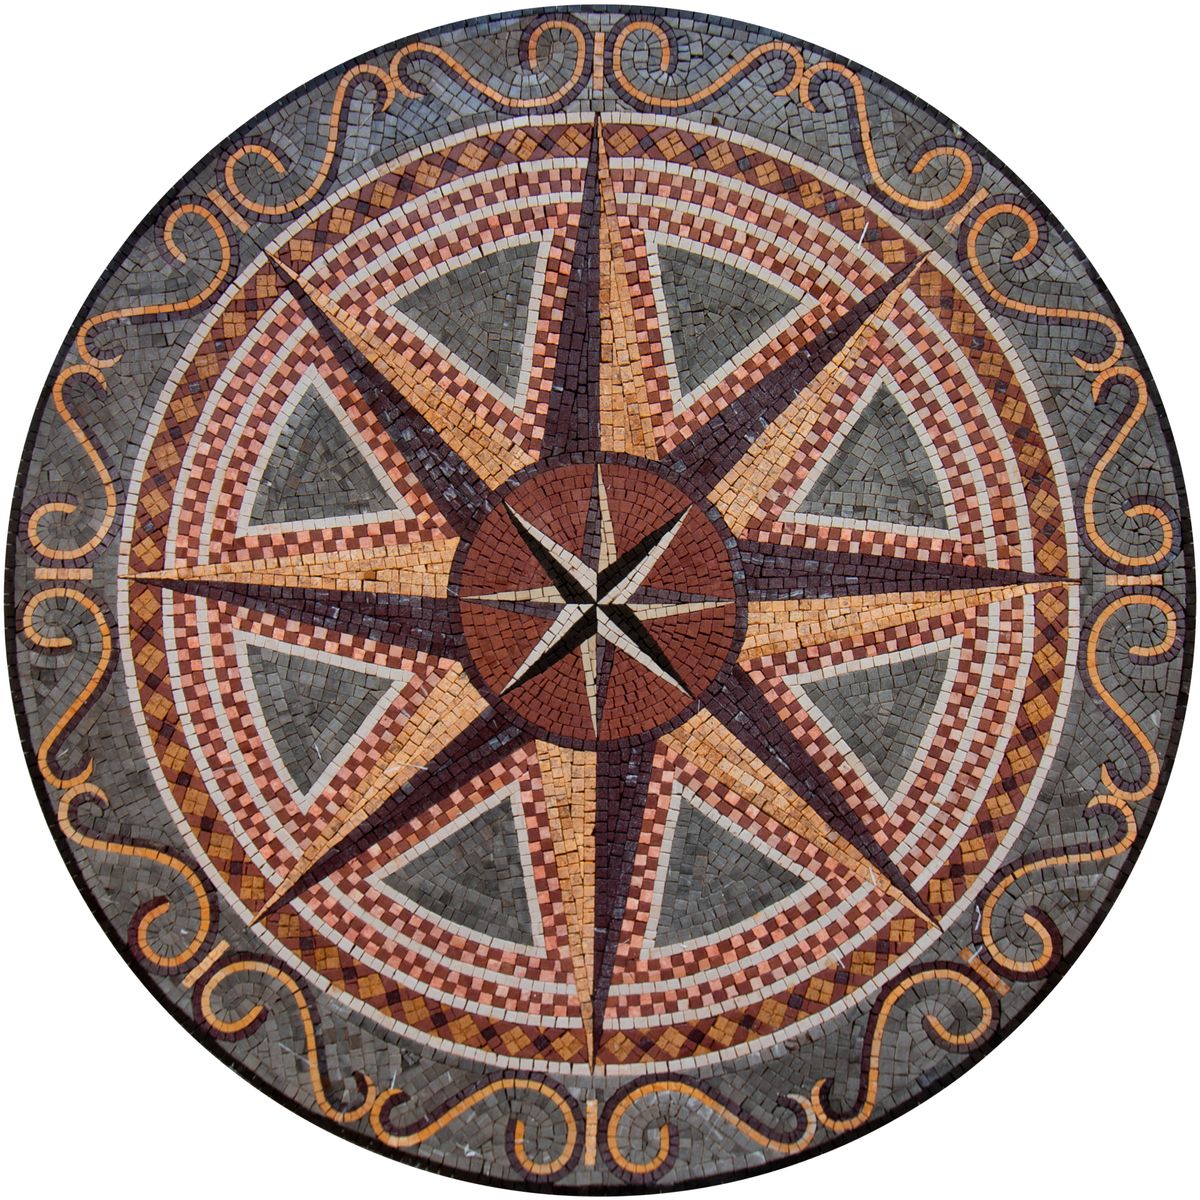 Cultivate a space bursting with earthy colors. This handcrafted mosaic features a rustic star design. mosaicnatural.com/mosaics/md007 #mosaic #mosaicart #handmade #handmadeart #handcrafted #walldecor #wallart #art #mural #design #uniqueart #interiordesign #uniqueflooring #hallwaydesign